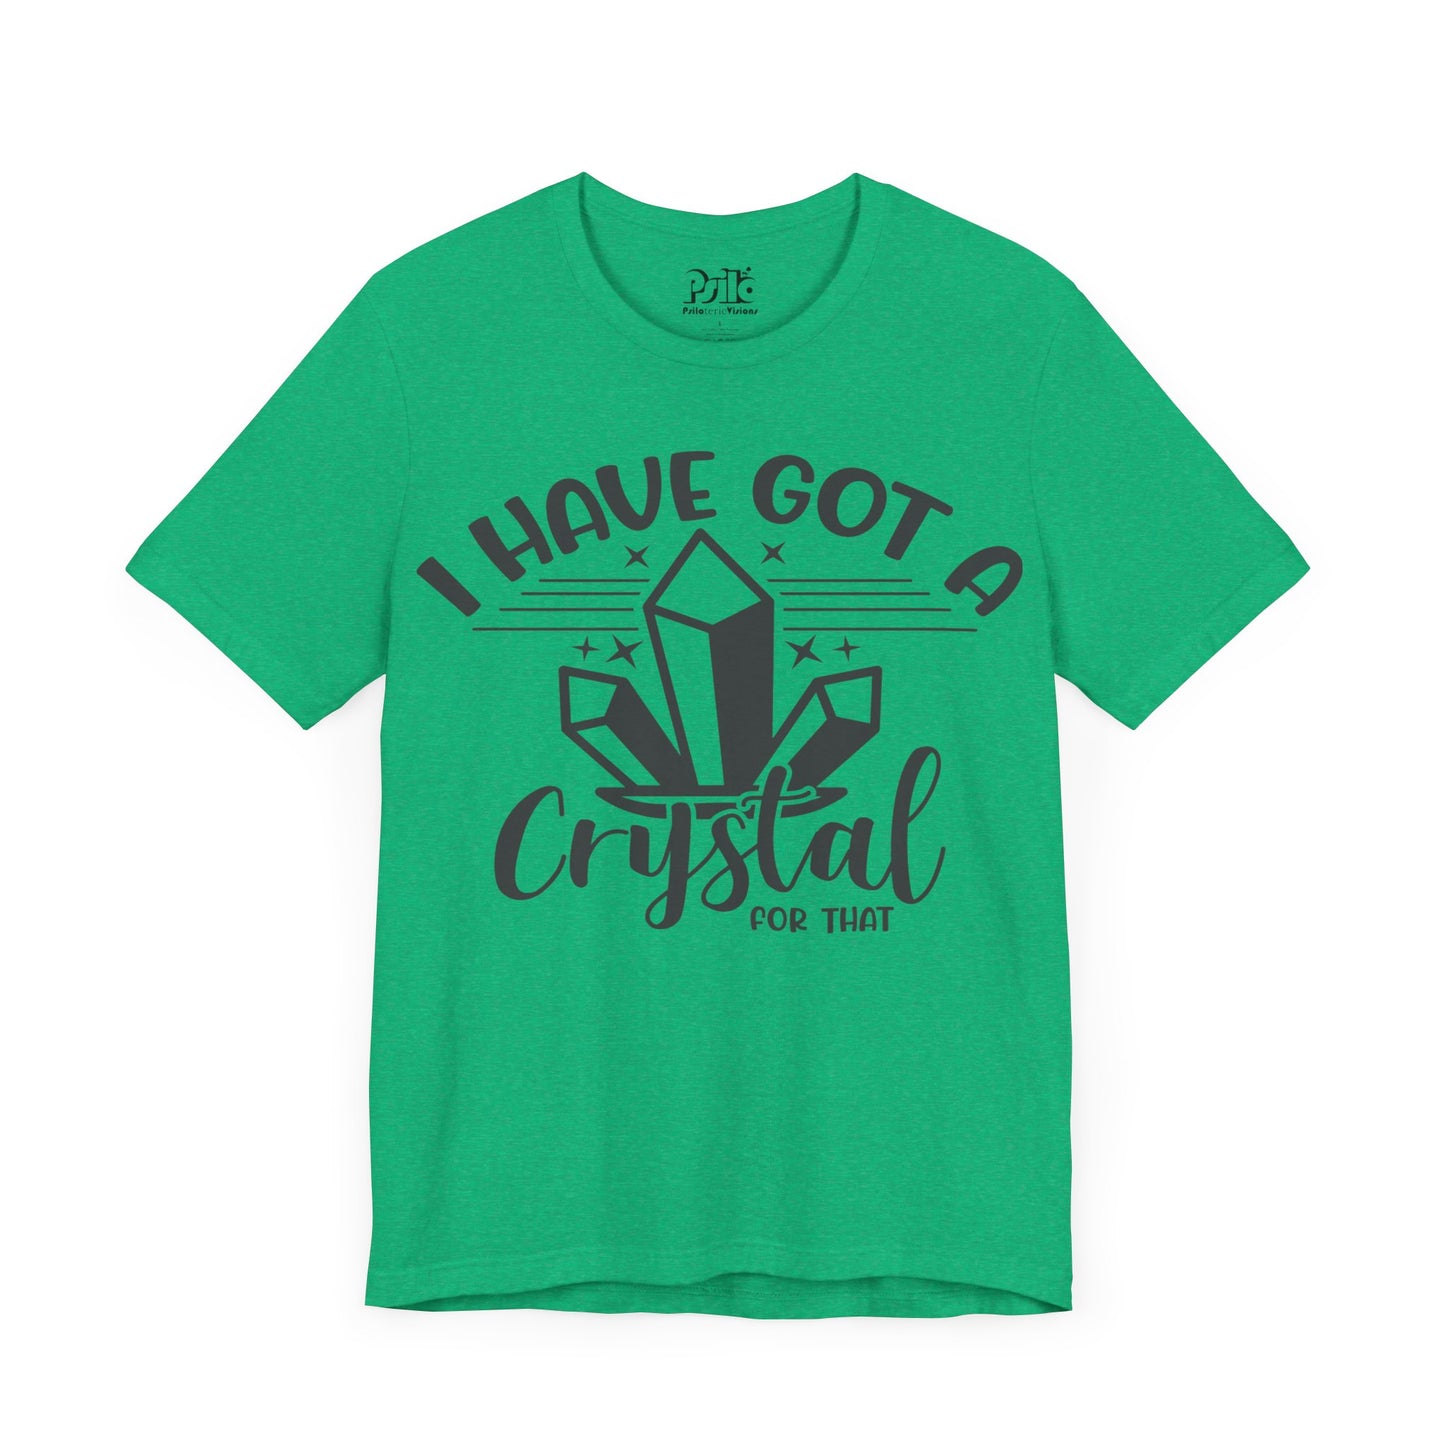 "I Have Got a Crystal for That" SHORT SLEEVE T-SHIRT